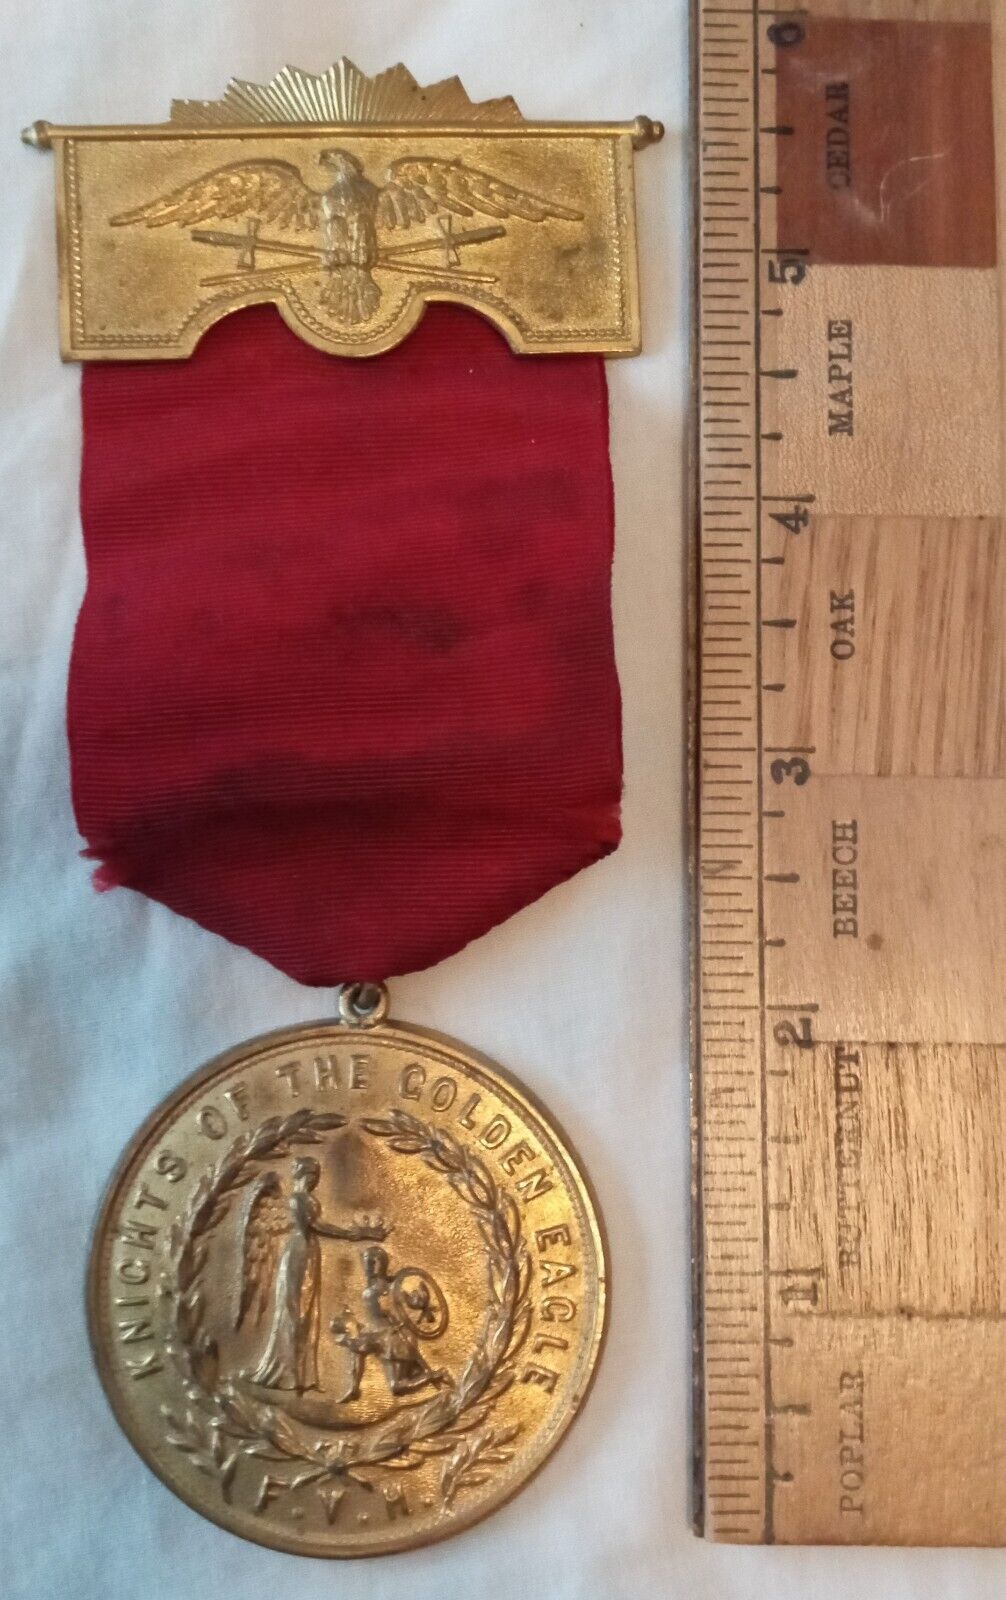 Antique Aug 24 1888 Knights of the Golden Eagle Ribbon Medal Non-hooked Version